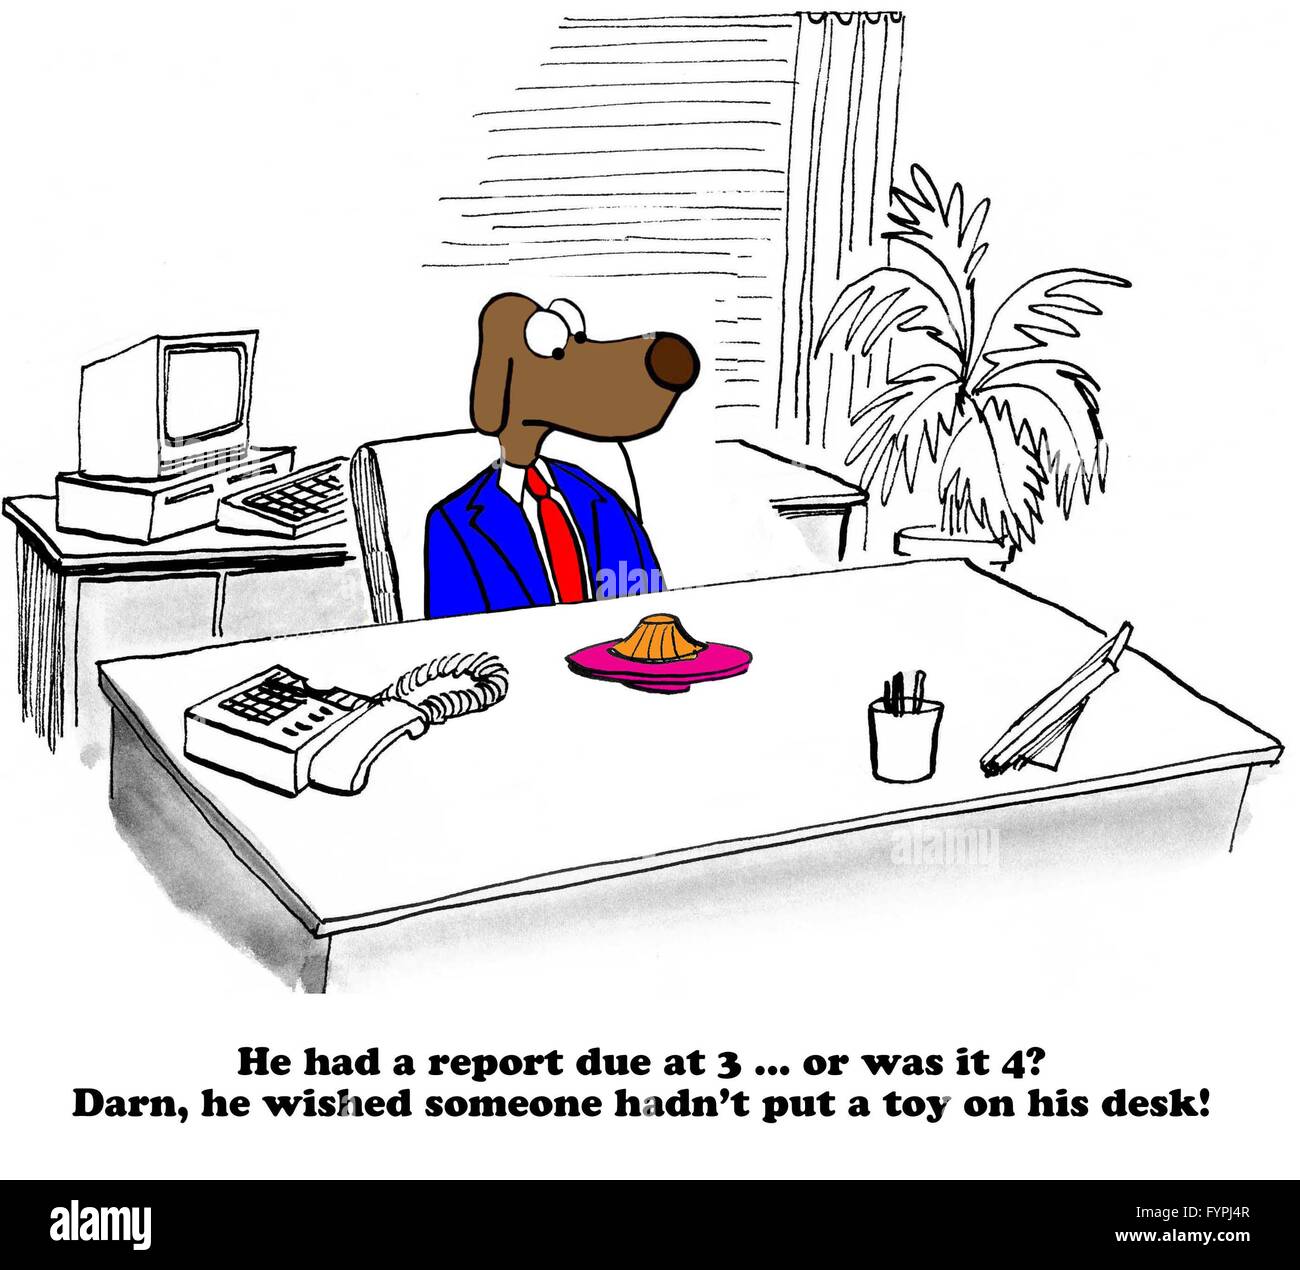 Business cartoon about goofing off at work. Stock Photo